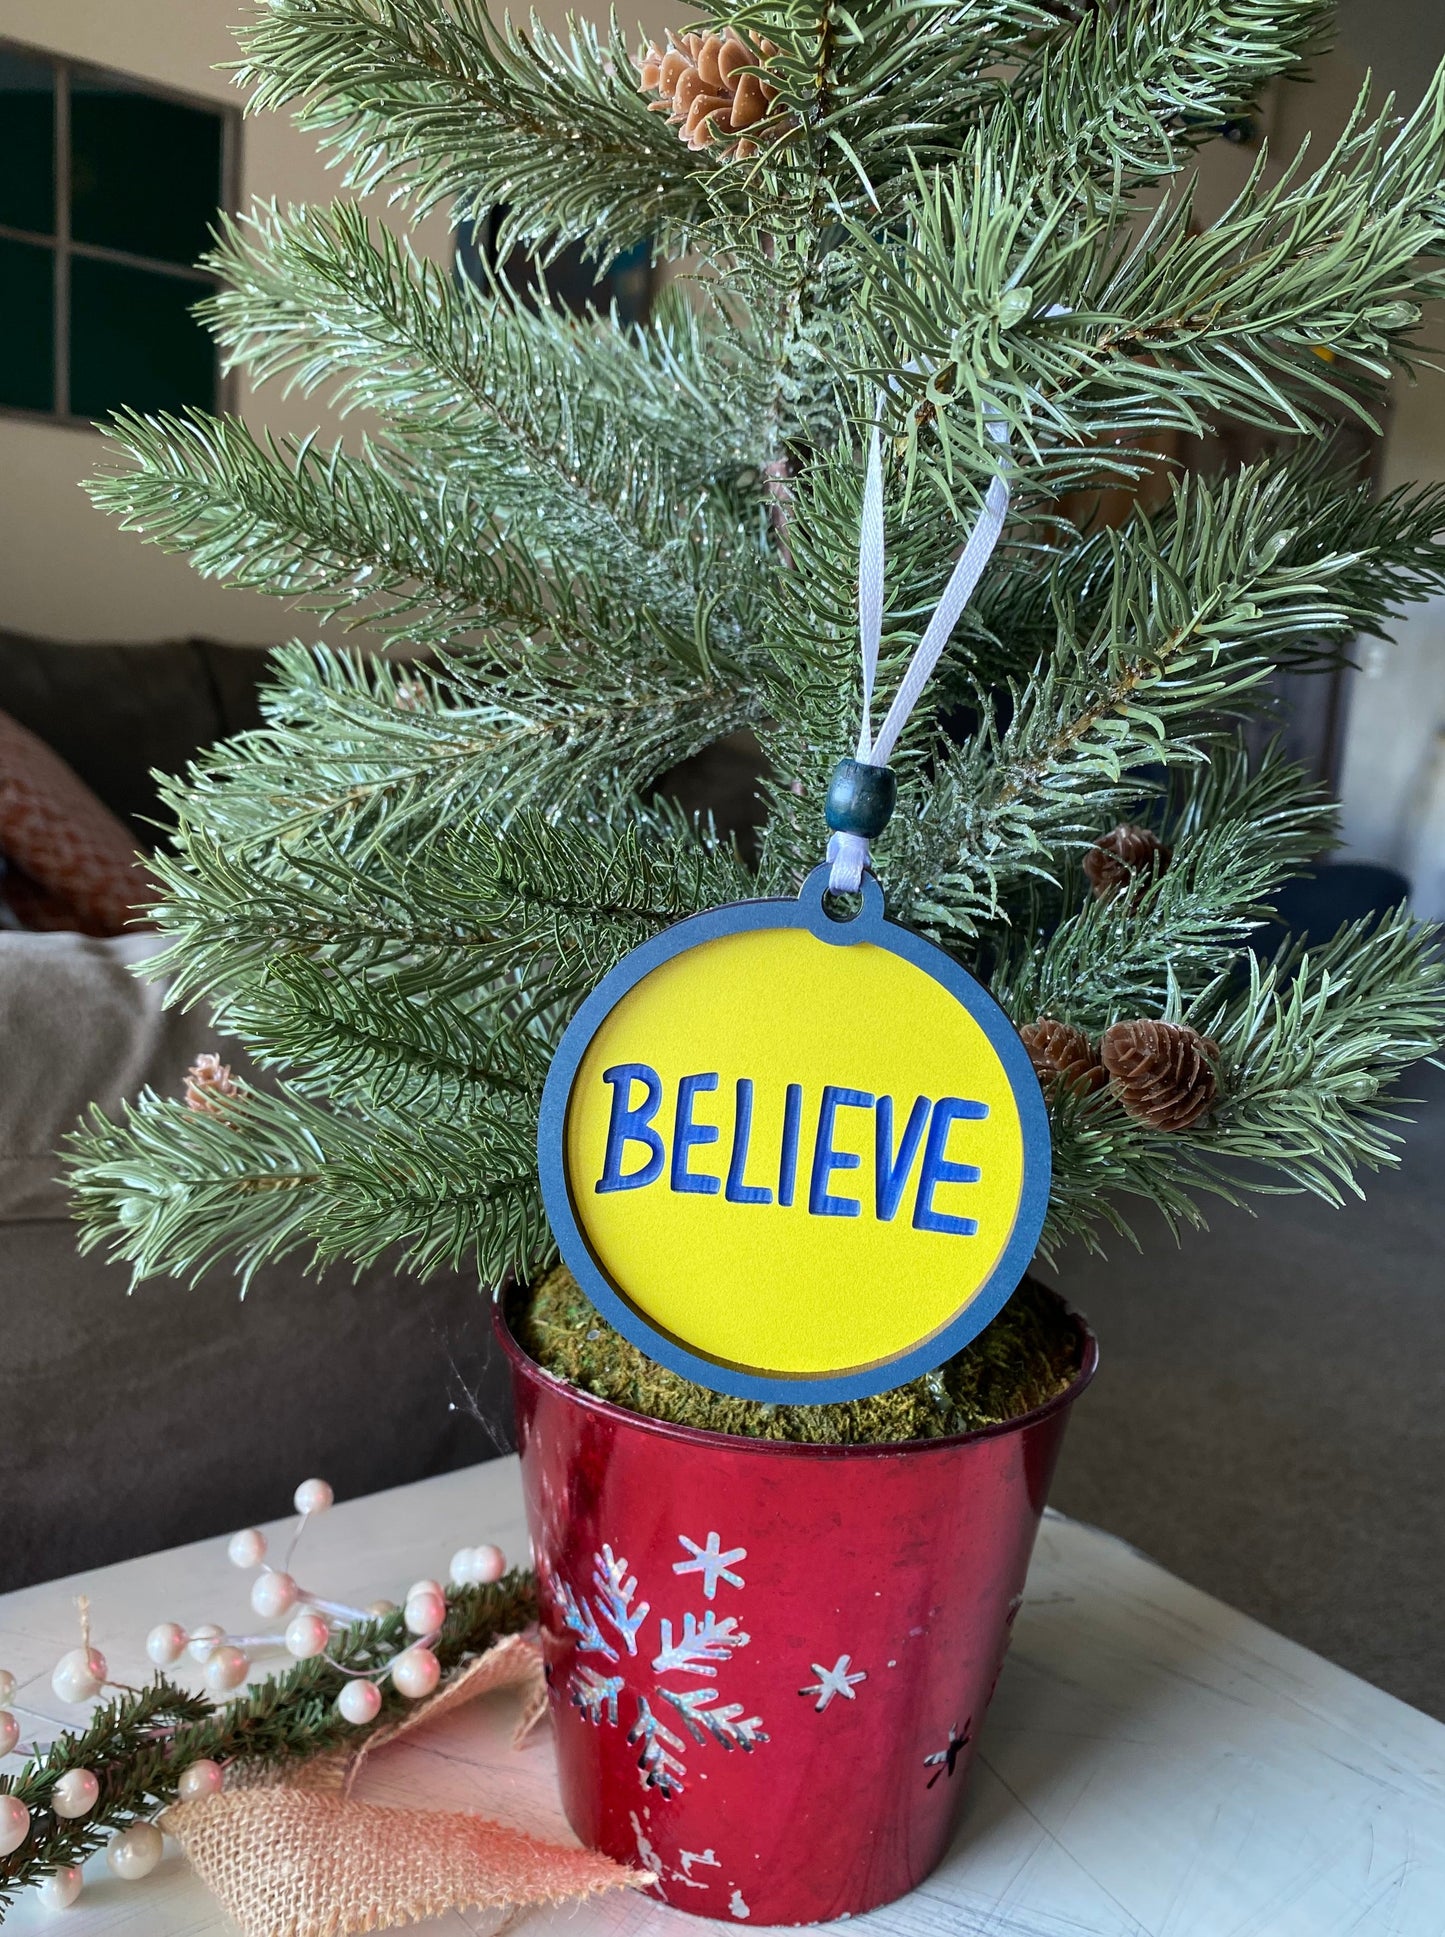 Believe - engraved acrylic blue and yellow 3-inch ornament - Novotny Designs